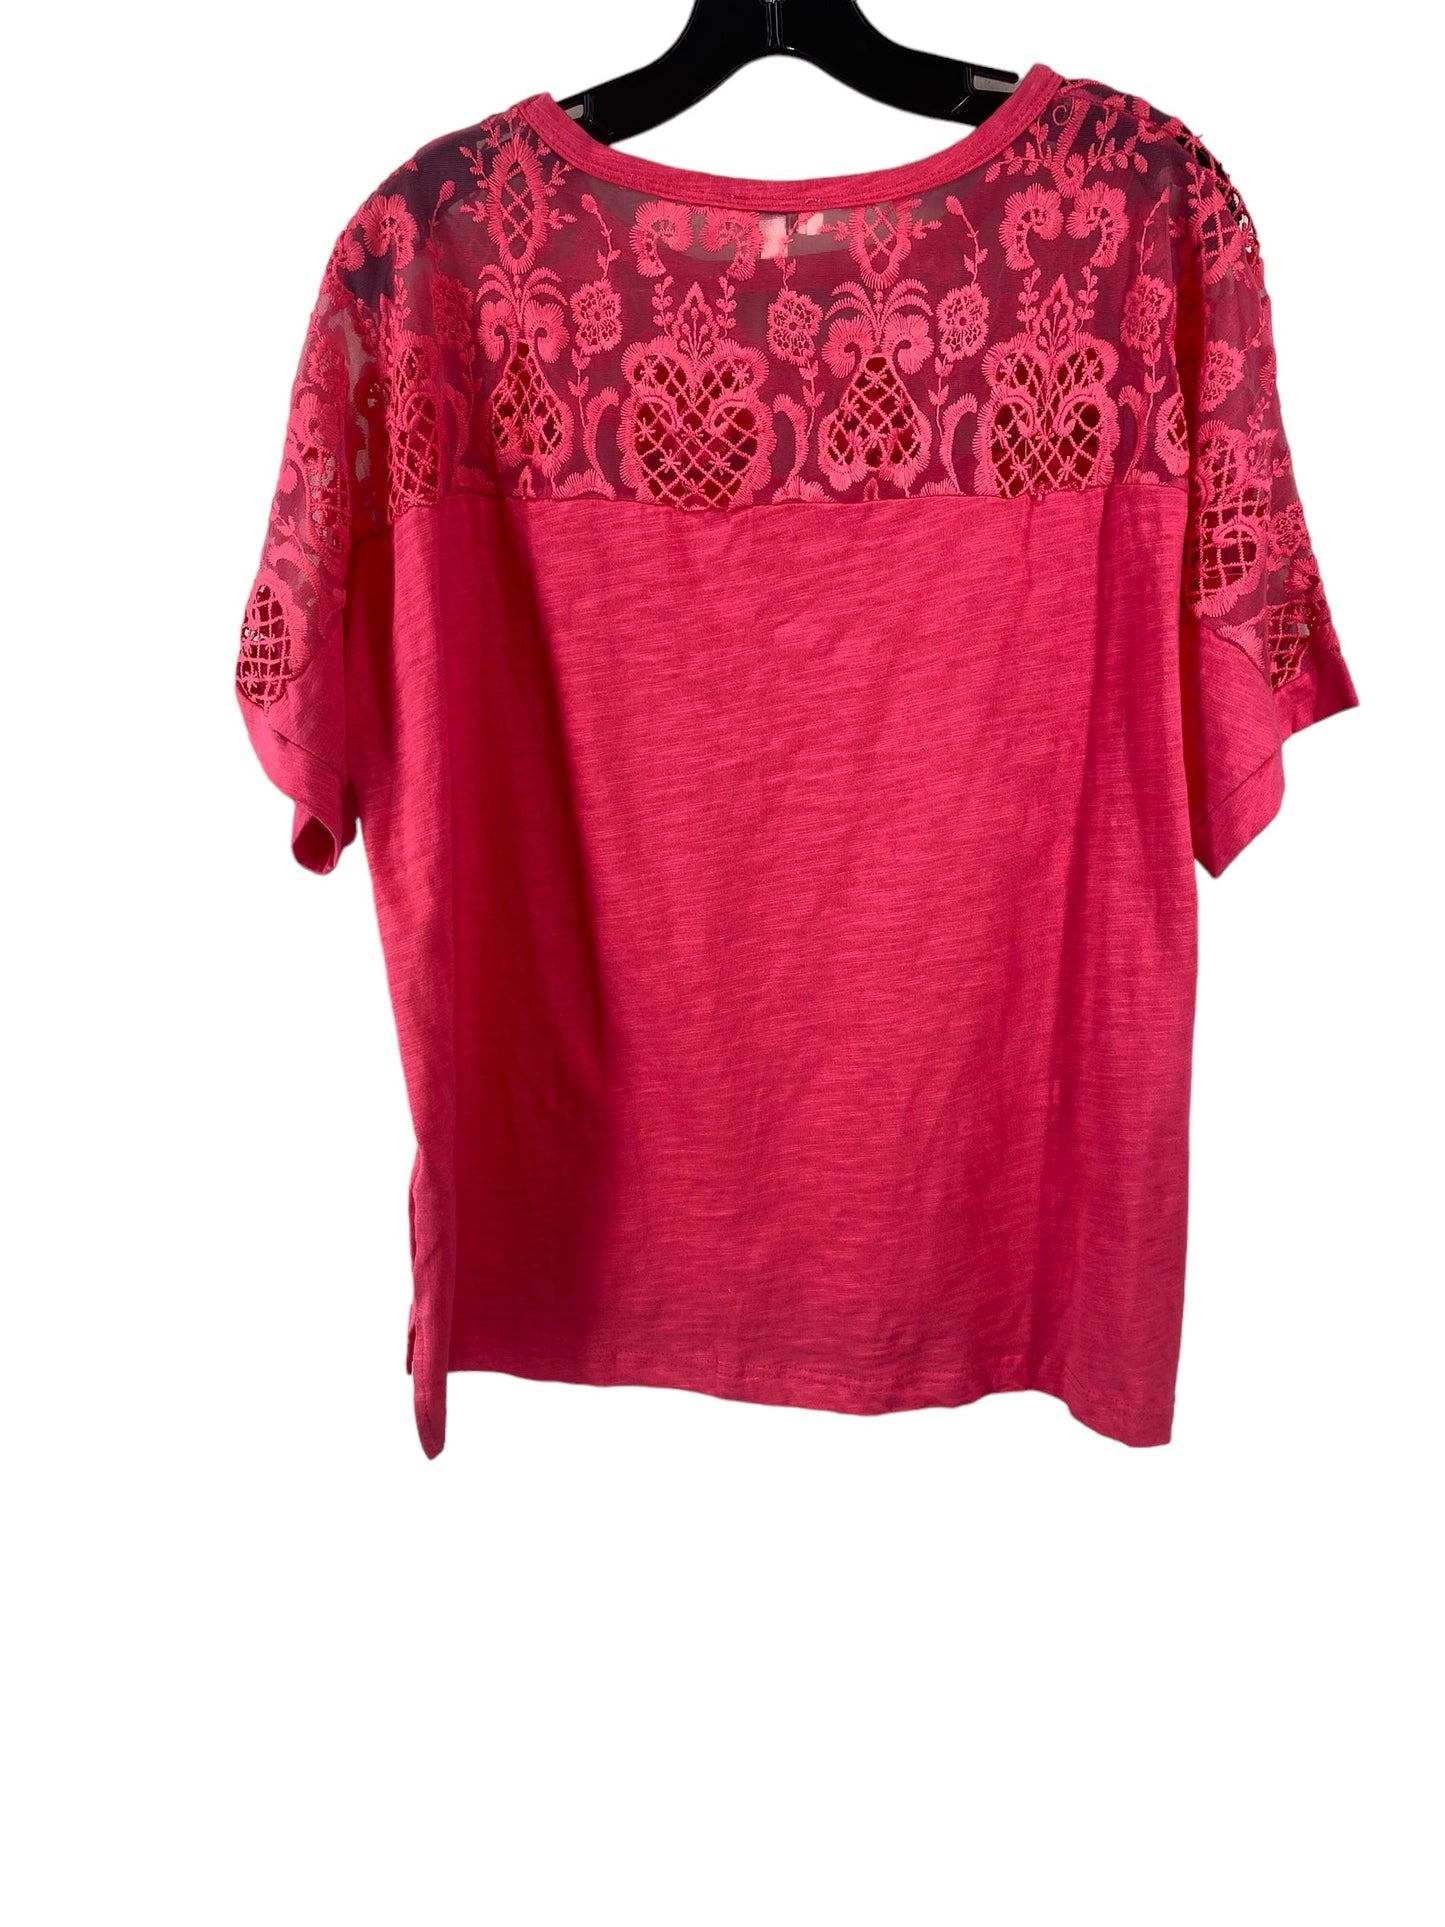 Pink Top Short Sleeve Umgee, Size L